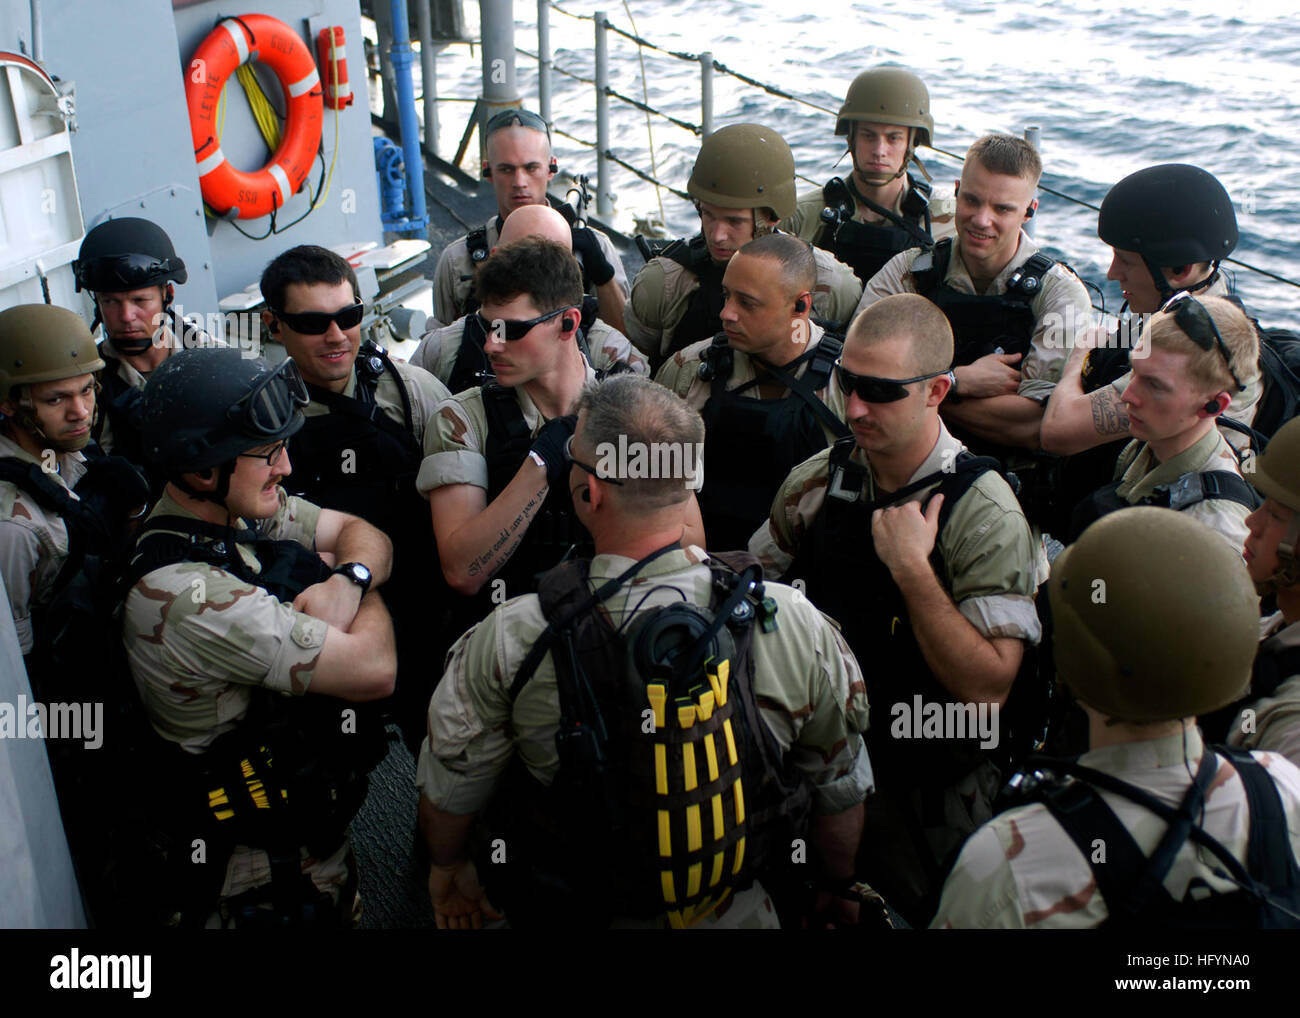 110325-N-BZ392-066 ARABIAN SEA (March 25, 2011) Sailors assigned to the visit, board, search and seizure team (VBSS) aboard the guided-missile cruiser USS Leyte Gulf (CG 55) prepare for an  operation on the Philippine-flagged merchant vessel Falcon Trader II which sent out a distress call reporting it had been boarded by pirates. Leyte Gulf is deployed to the U.S. 5th Fleet area of responsibility to conduct maritime security operations. (U.S. Navy photo by Mass Communication Specialist 3rd Class Robert Guerra/Released) US Navy 110325-N-BZ392-066 Sailors assigned to the VBSS team aboard USS Ley Stock Photo